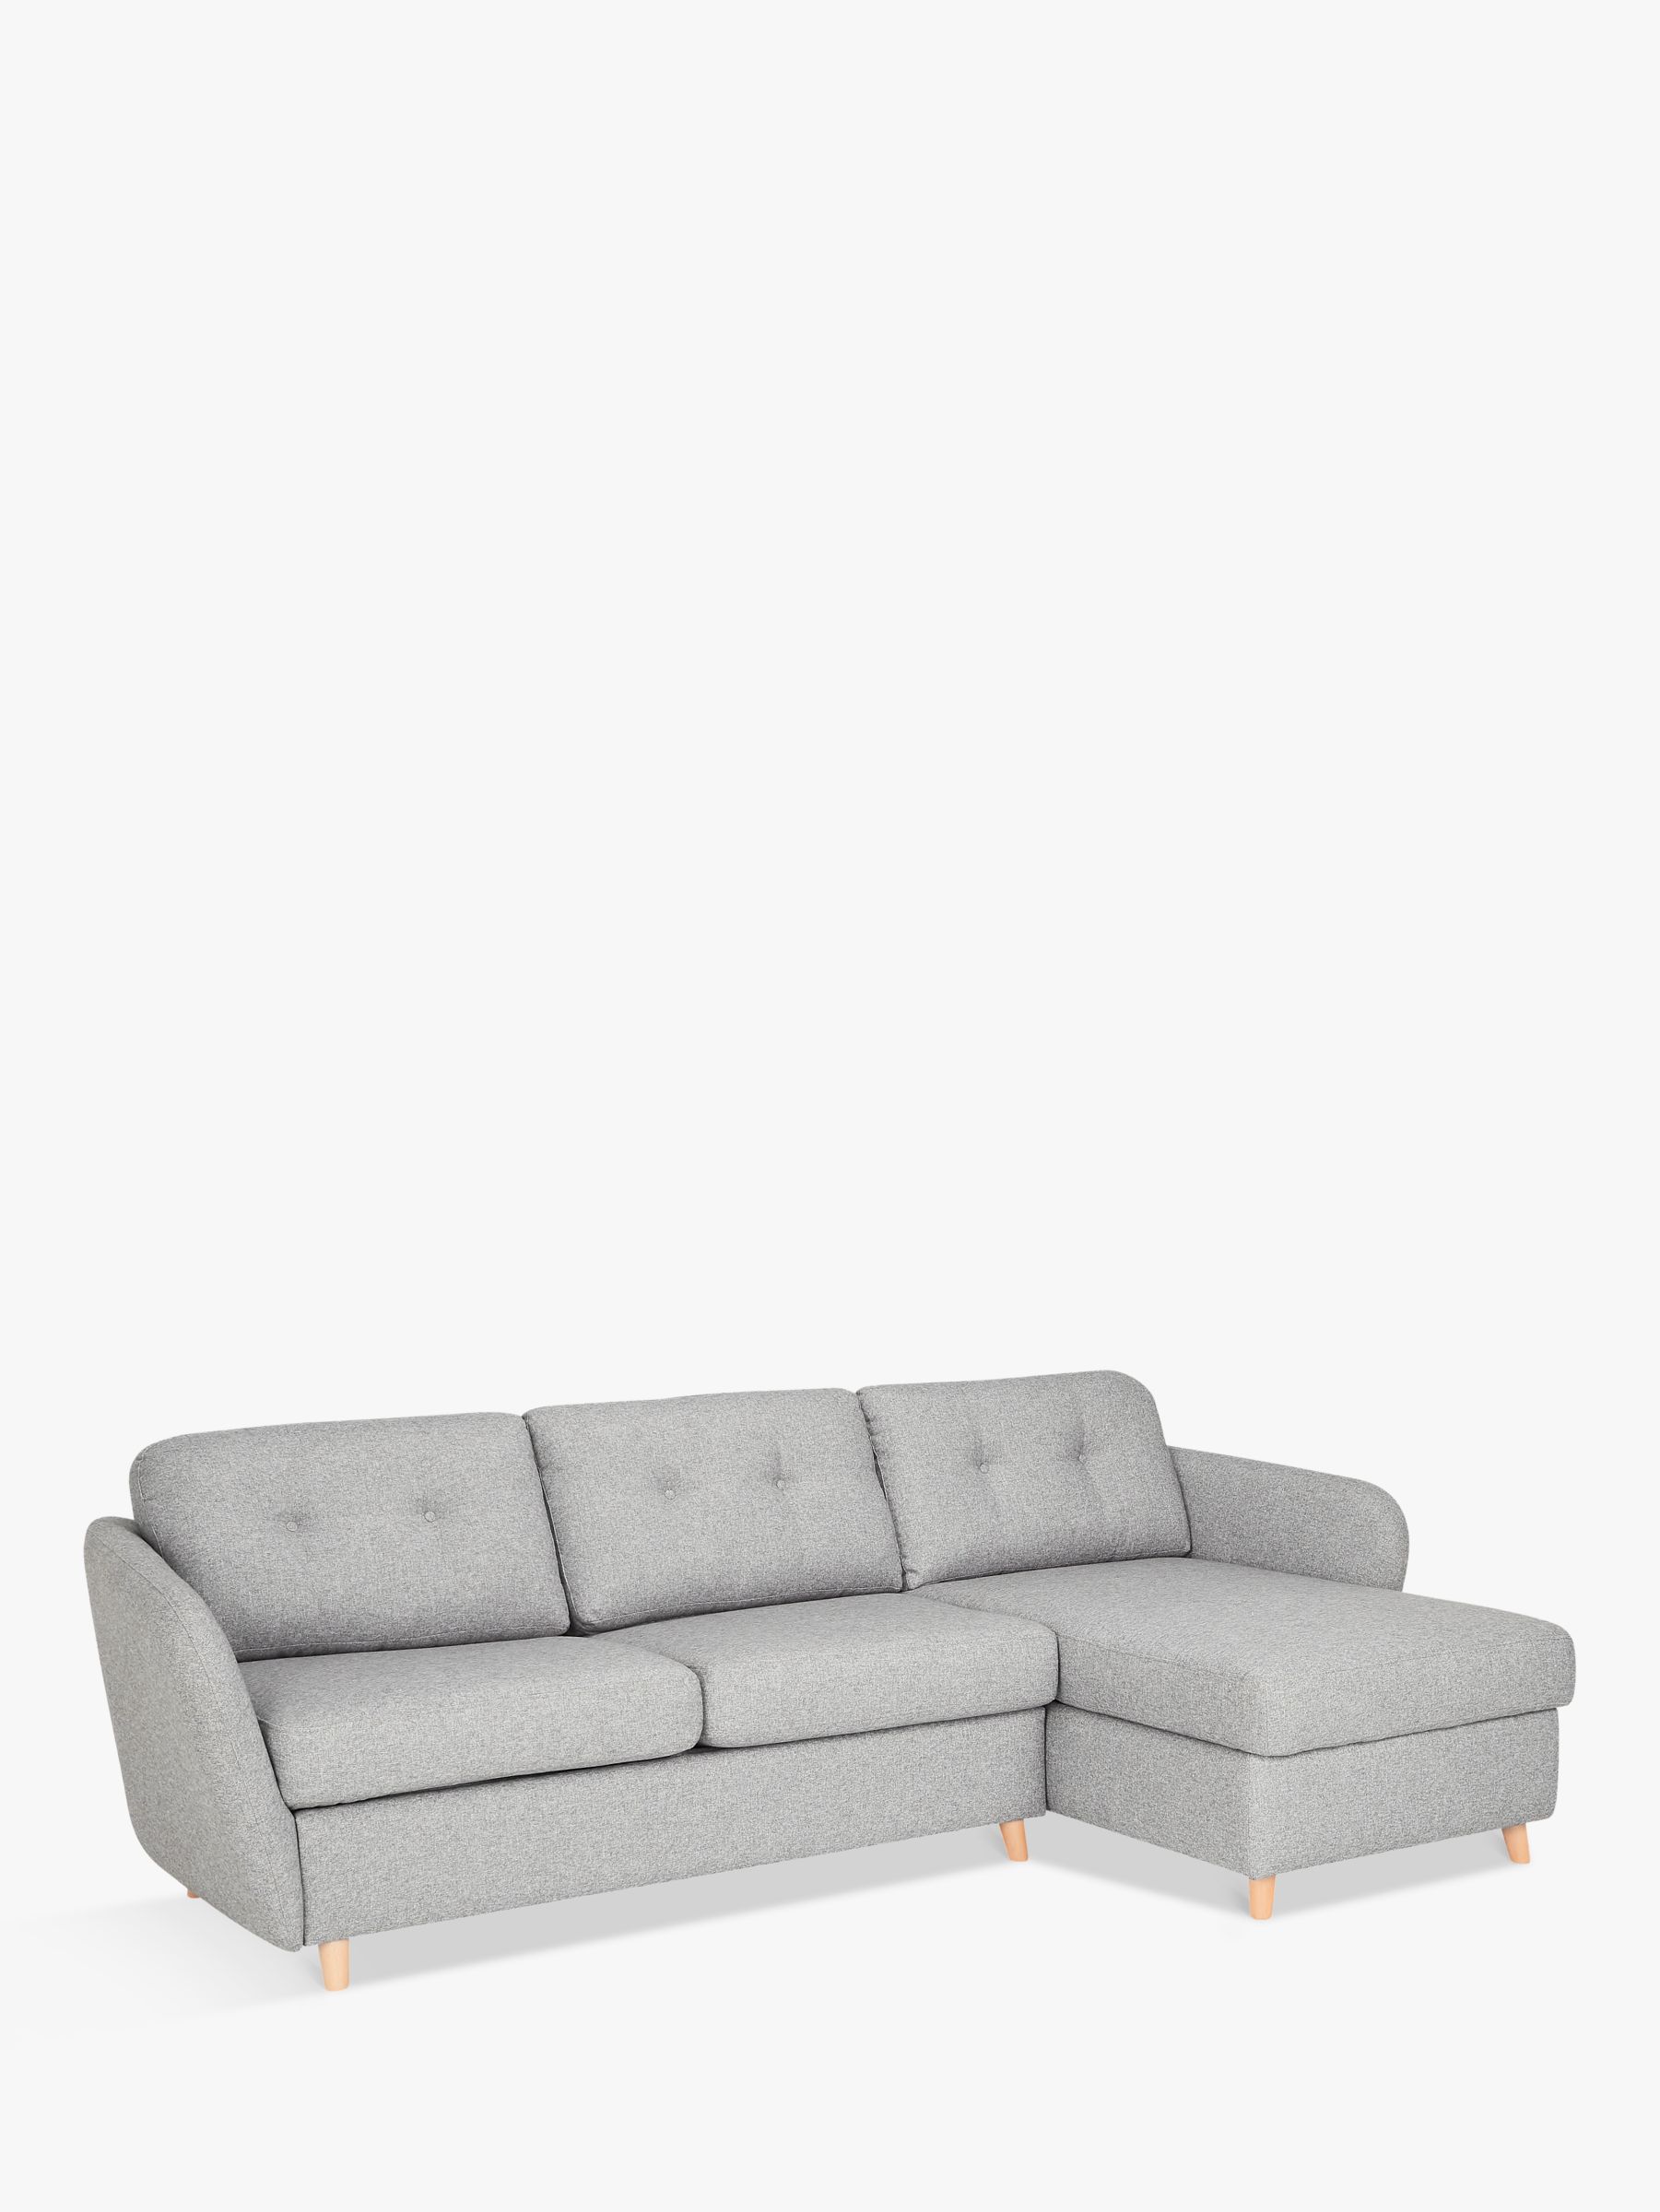 Photo of John lewis arlo 5+ seater rhf chaise with storage sofa bed